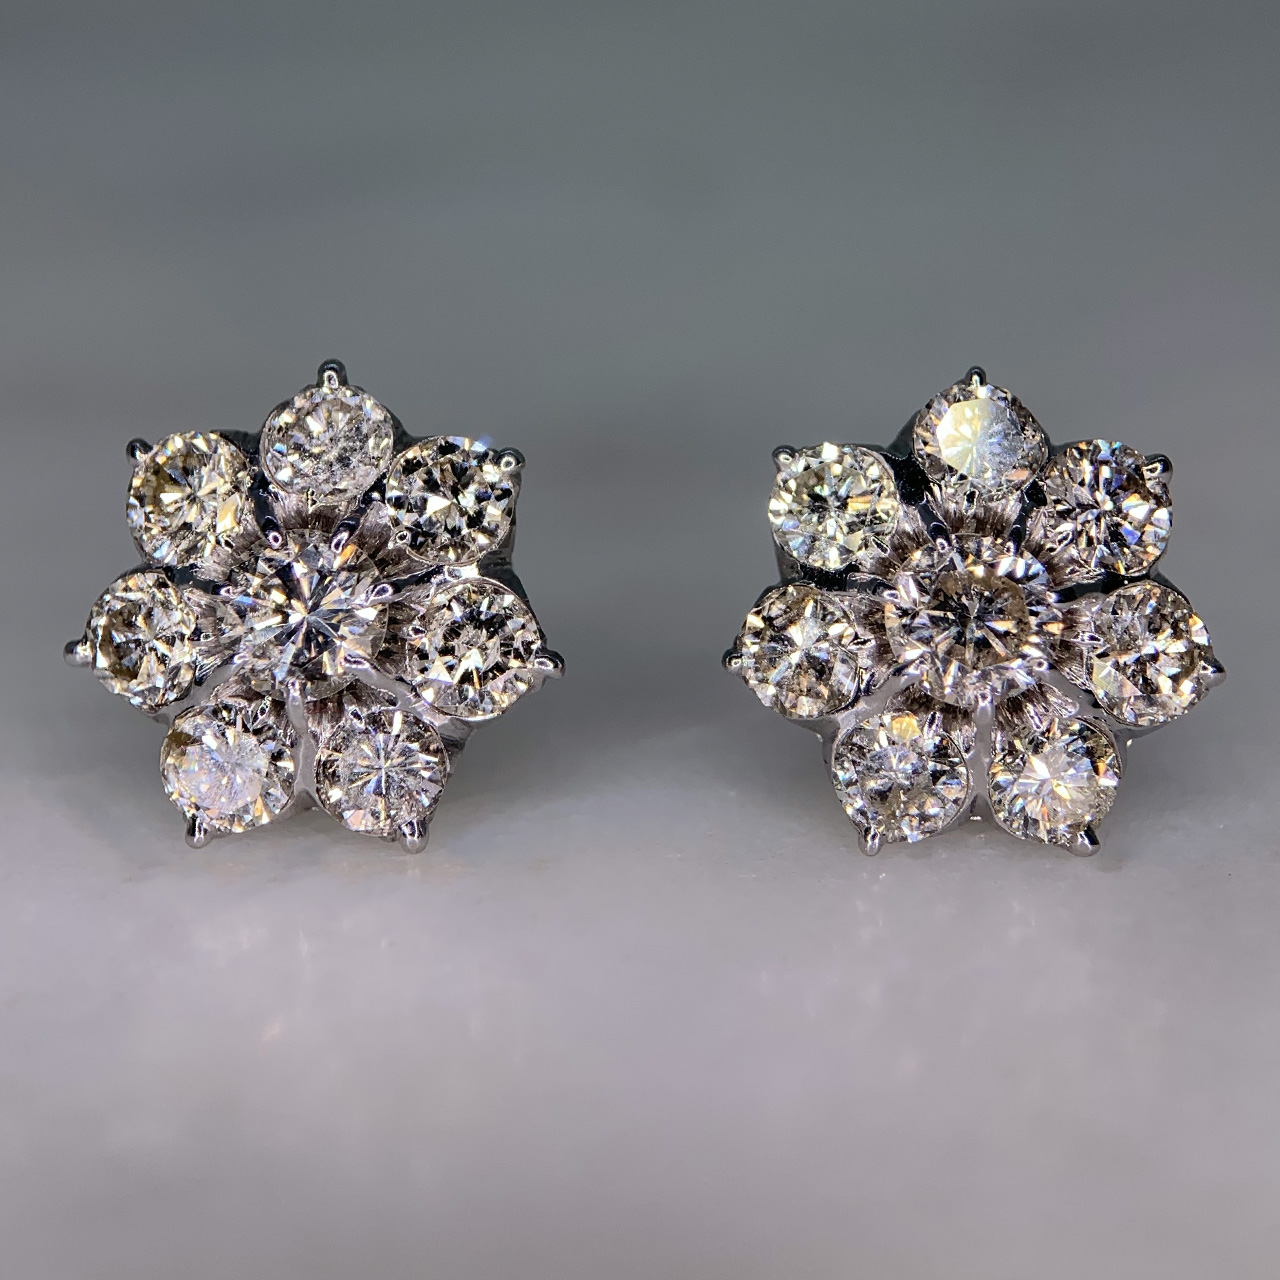 3.0carat Diamond Flower Cluster Earrings - Chique to Antique Jewellery